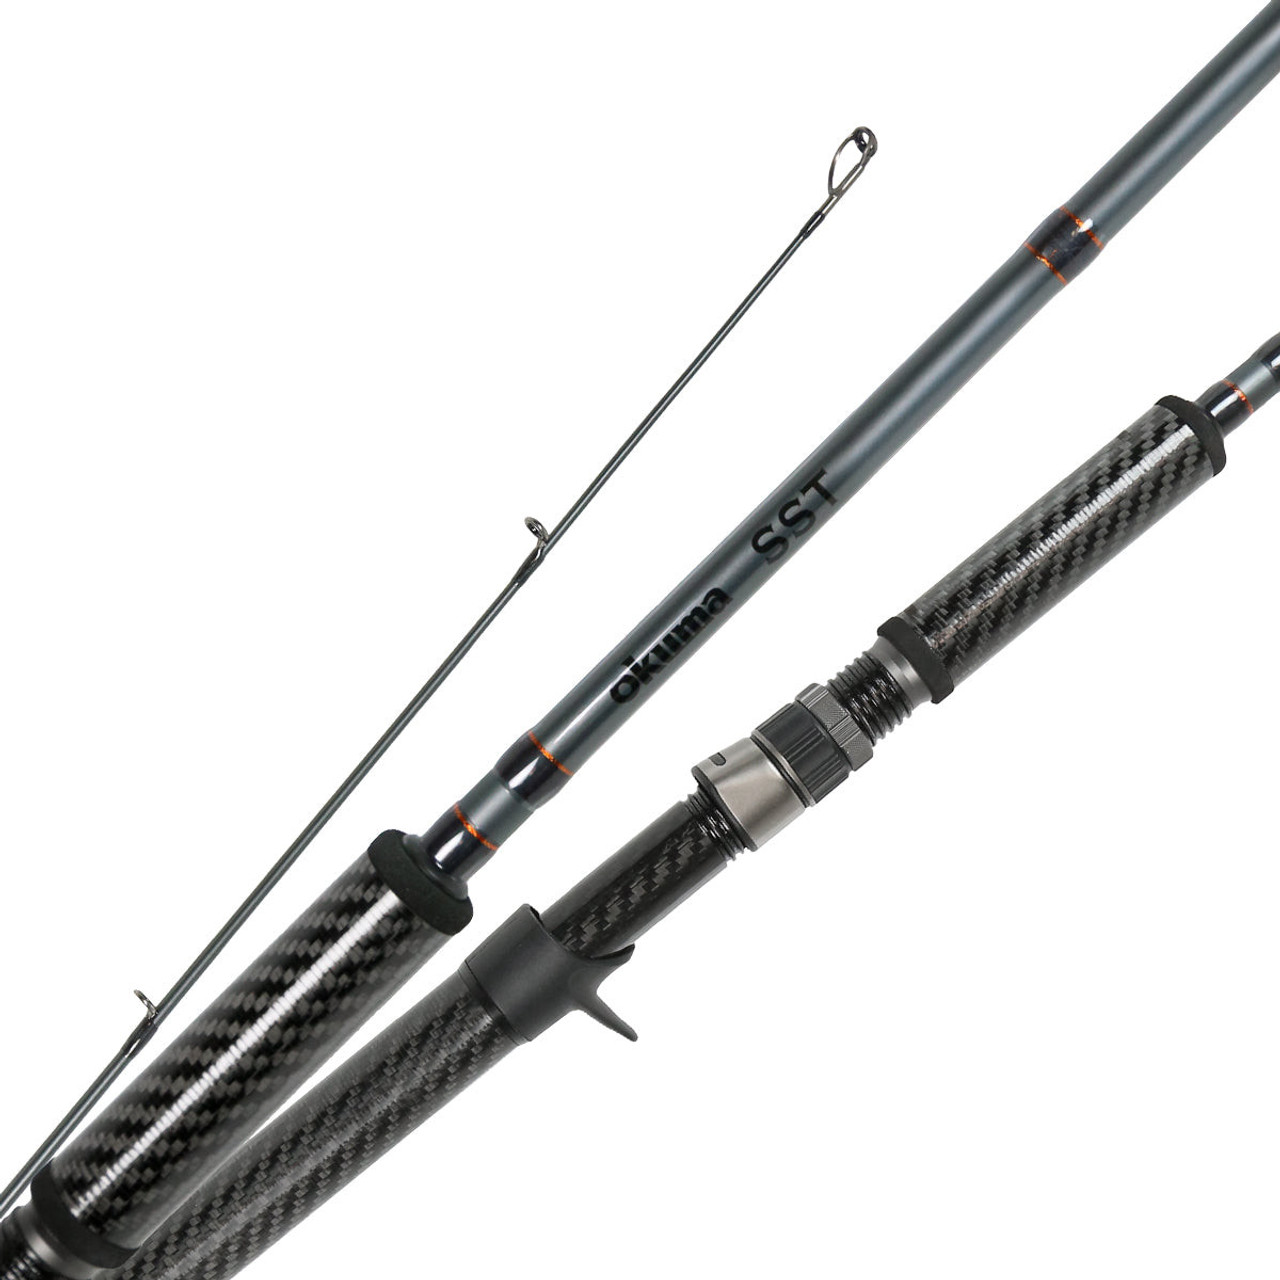 Okuma SST New generation SST Fishing rod with carbon grips M 8-17LB 10'6  2PC SPIN CP-5 - SteelheadStuff Float and Fly Gear